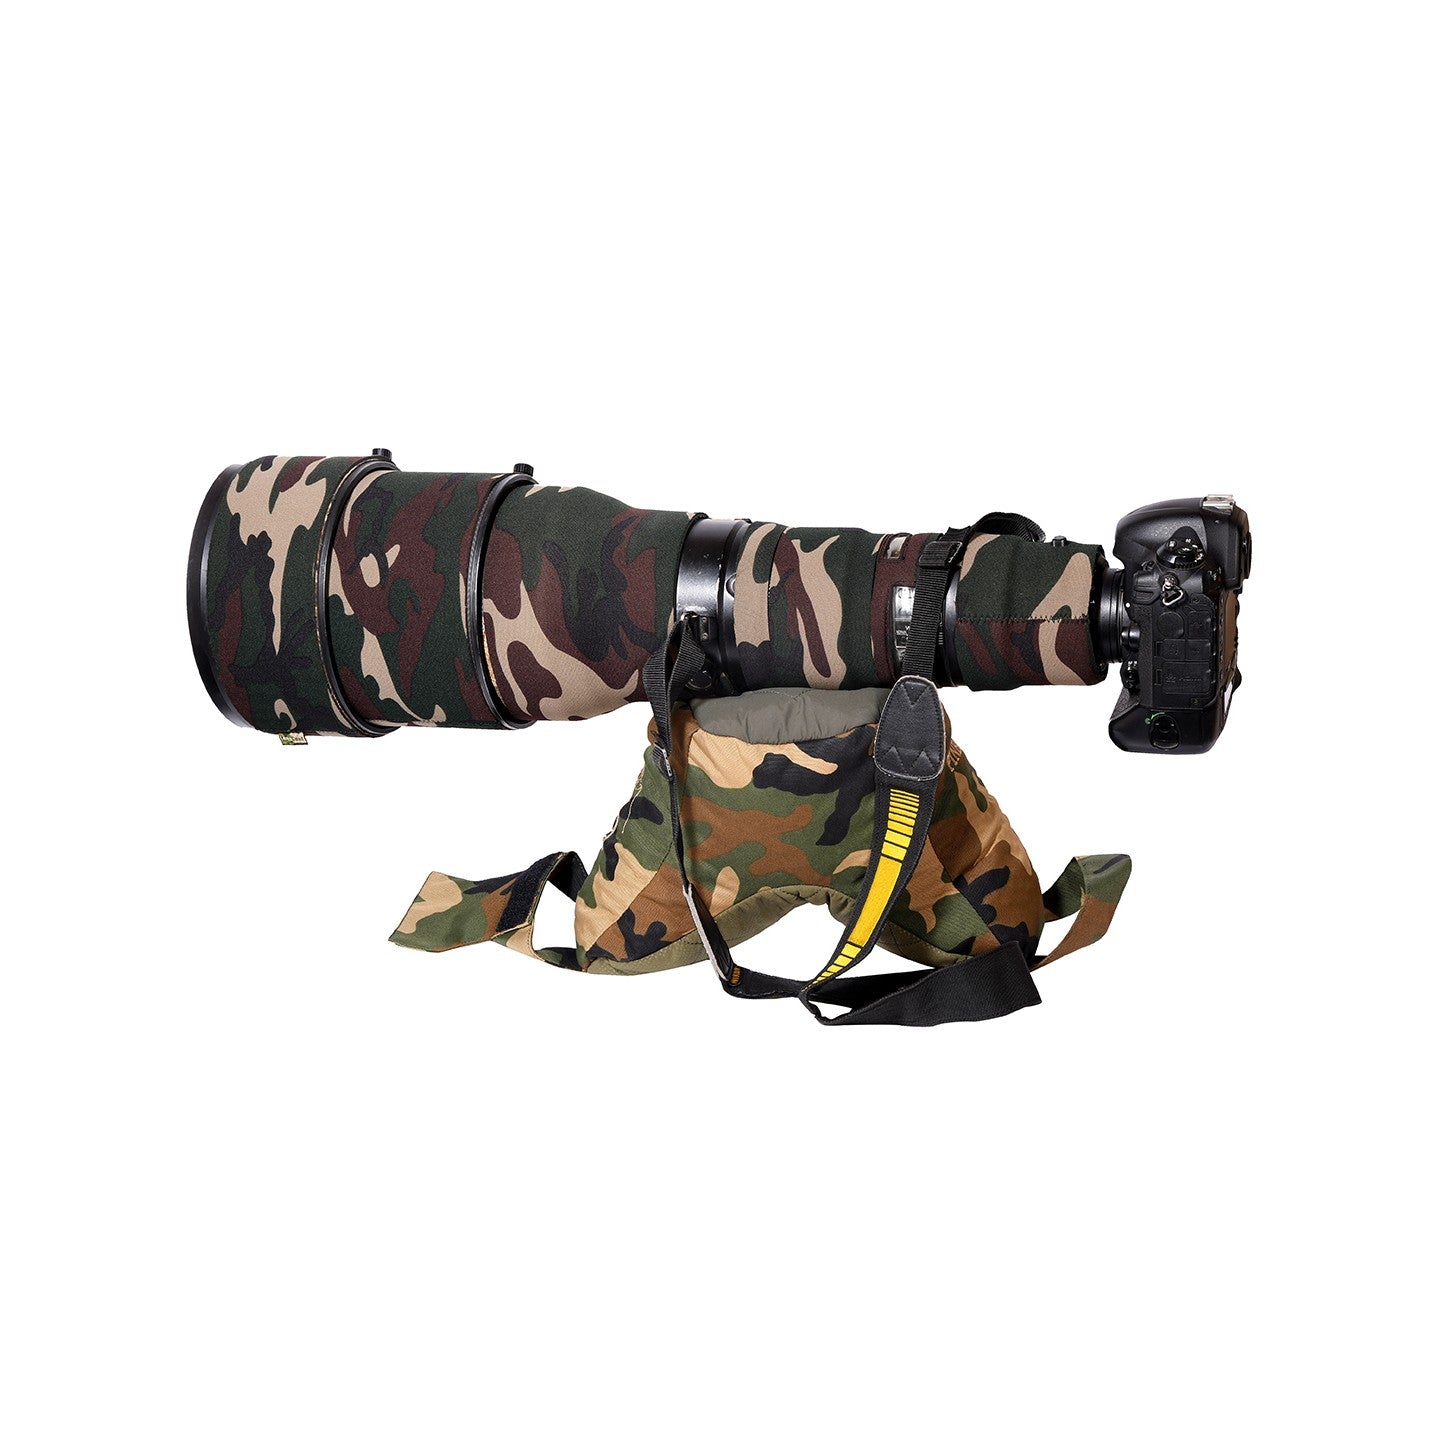 Image: A camera attached to a telephoto lens placed on the P5 Bean Bag. The camera and lens are covered with a camouflage cover, blending seamlessly with the environment for wildlife photography. The P5 Bean Bag provides a stable platform for capturing steady shots in the wild